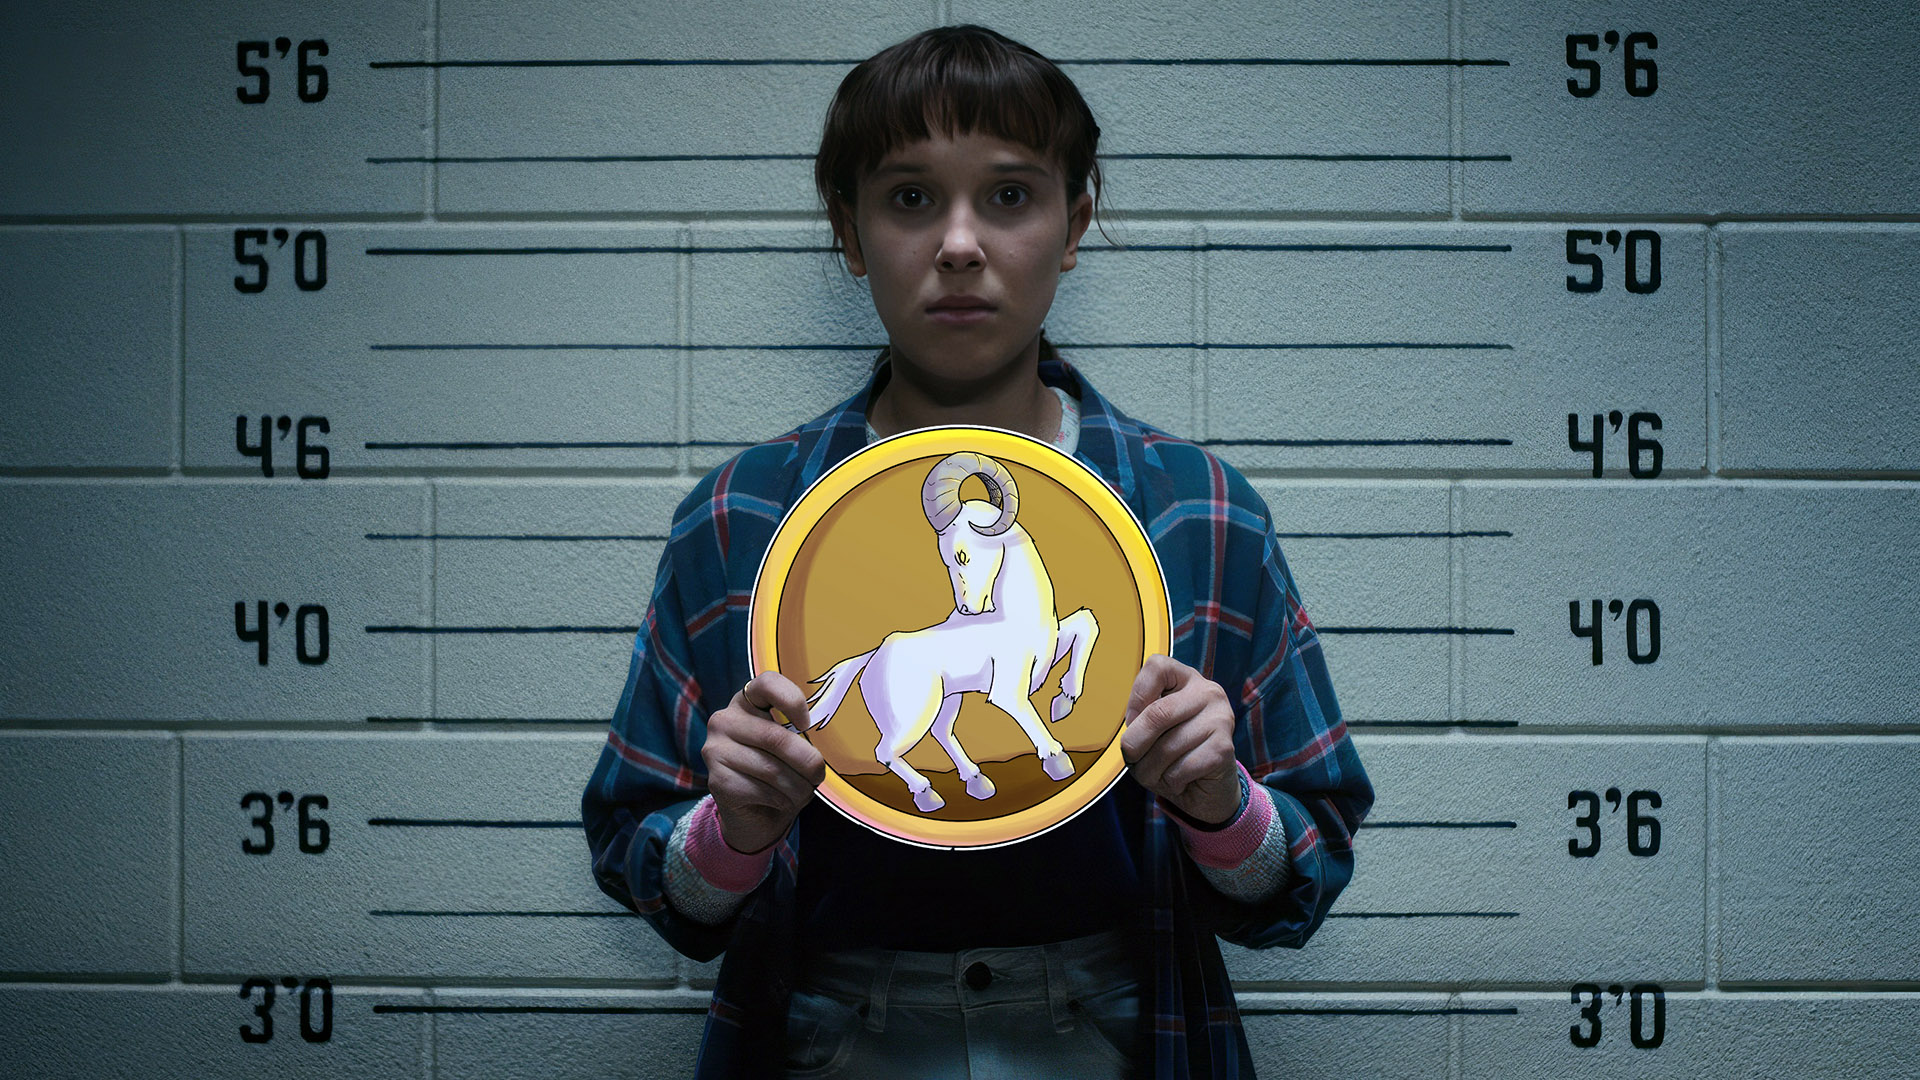 Discover Your Stranger Things Alter Ego Based on Your Zodiac